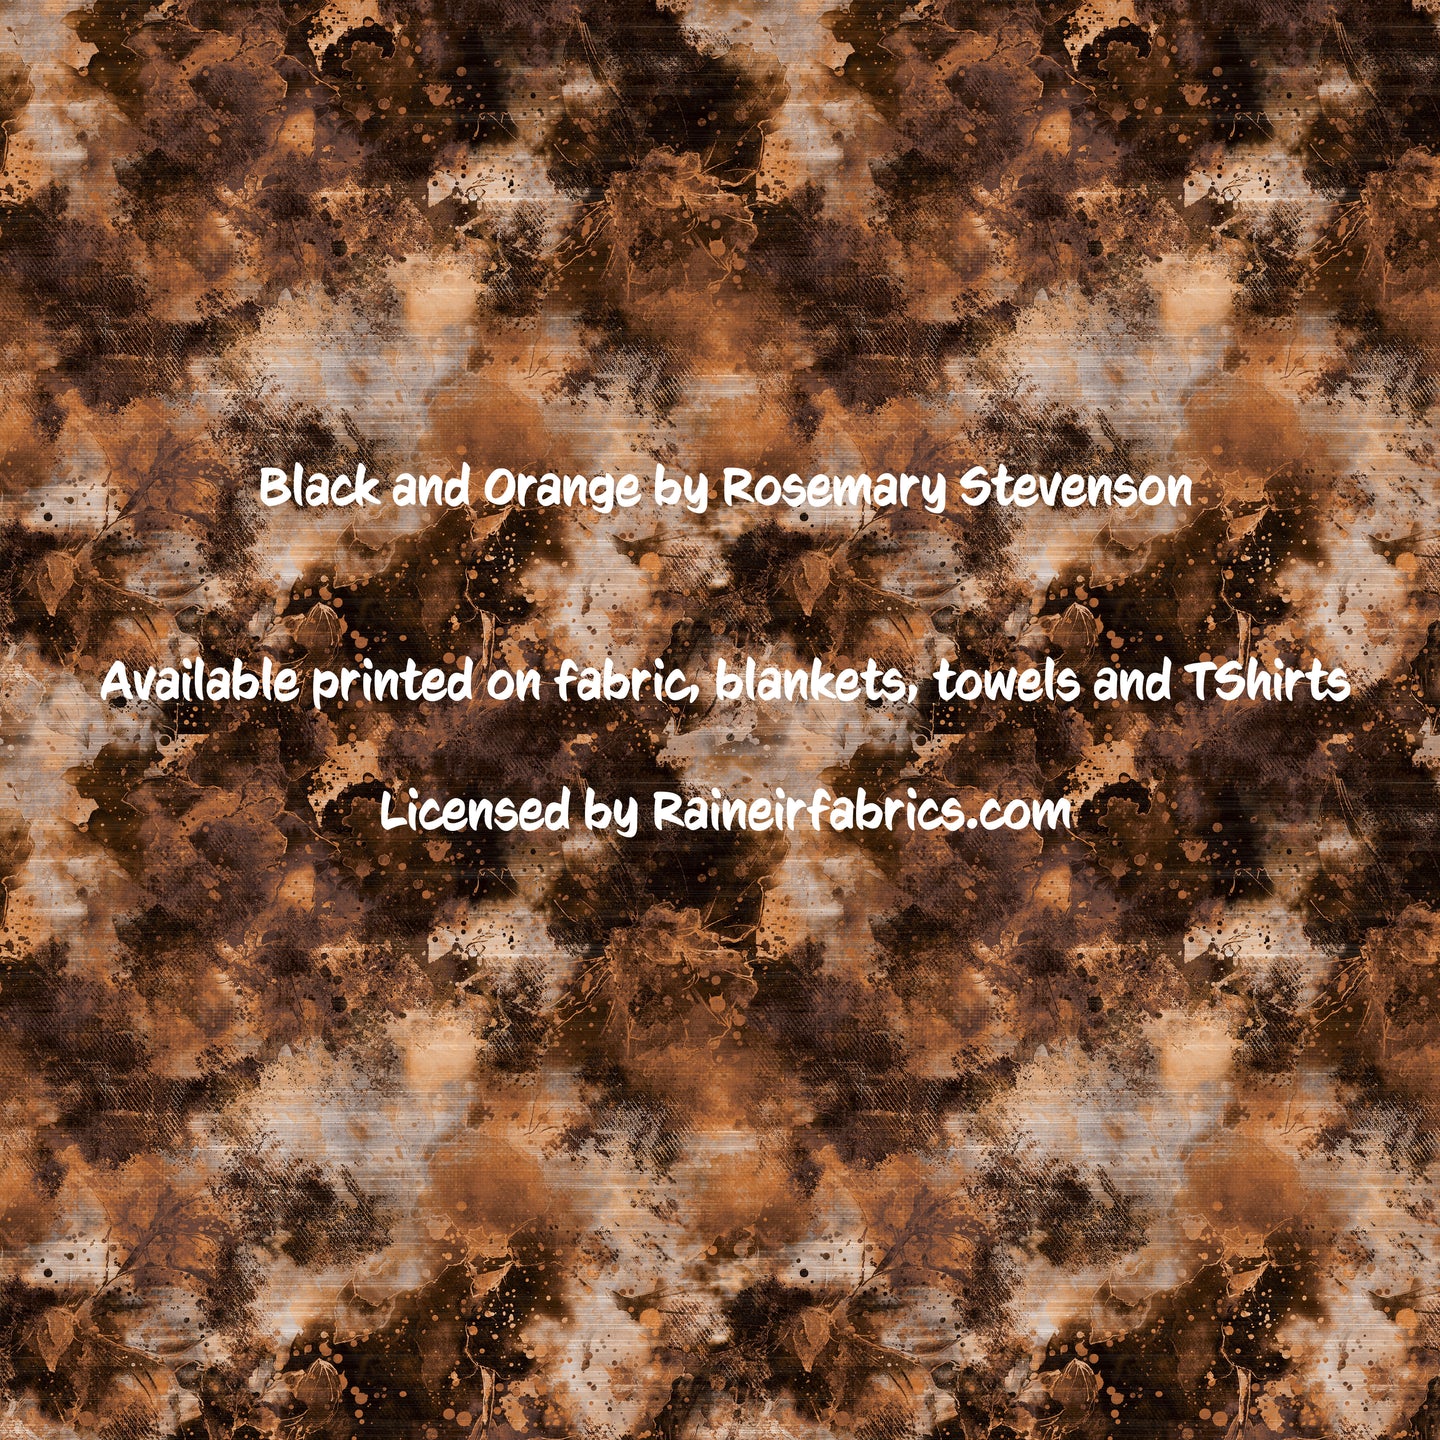 Black and Orange Linen from Rosemary Stevenson  - 2-5 day turnaround - Order by 1/2 yard; Description of bases below